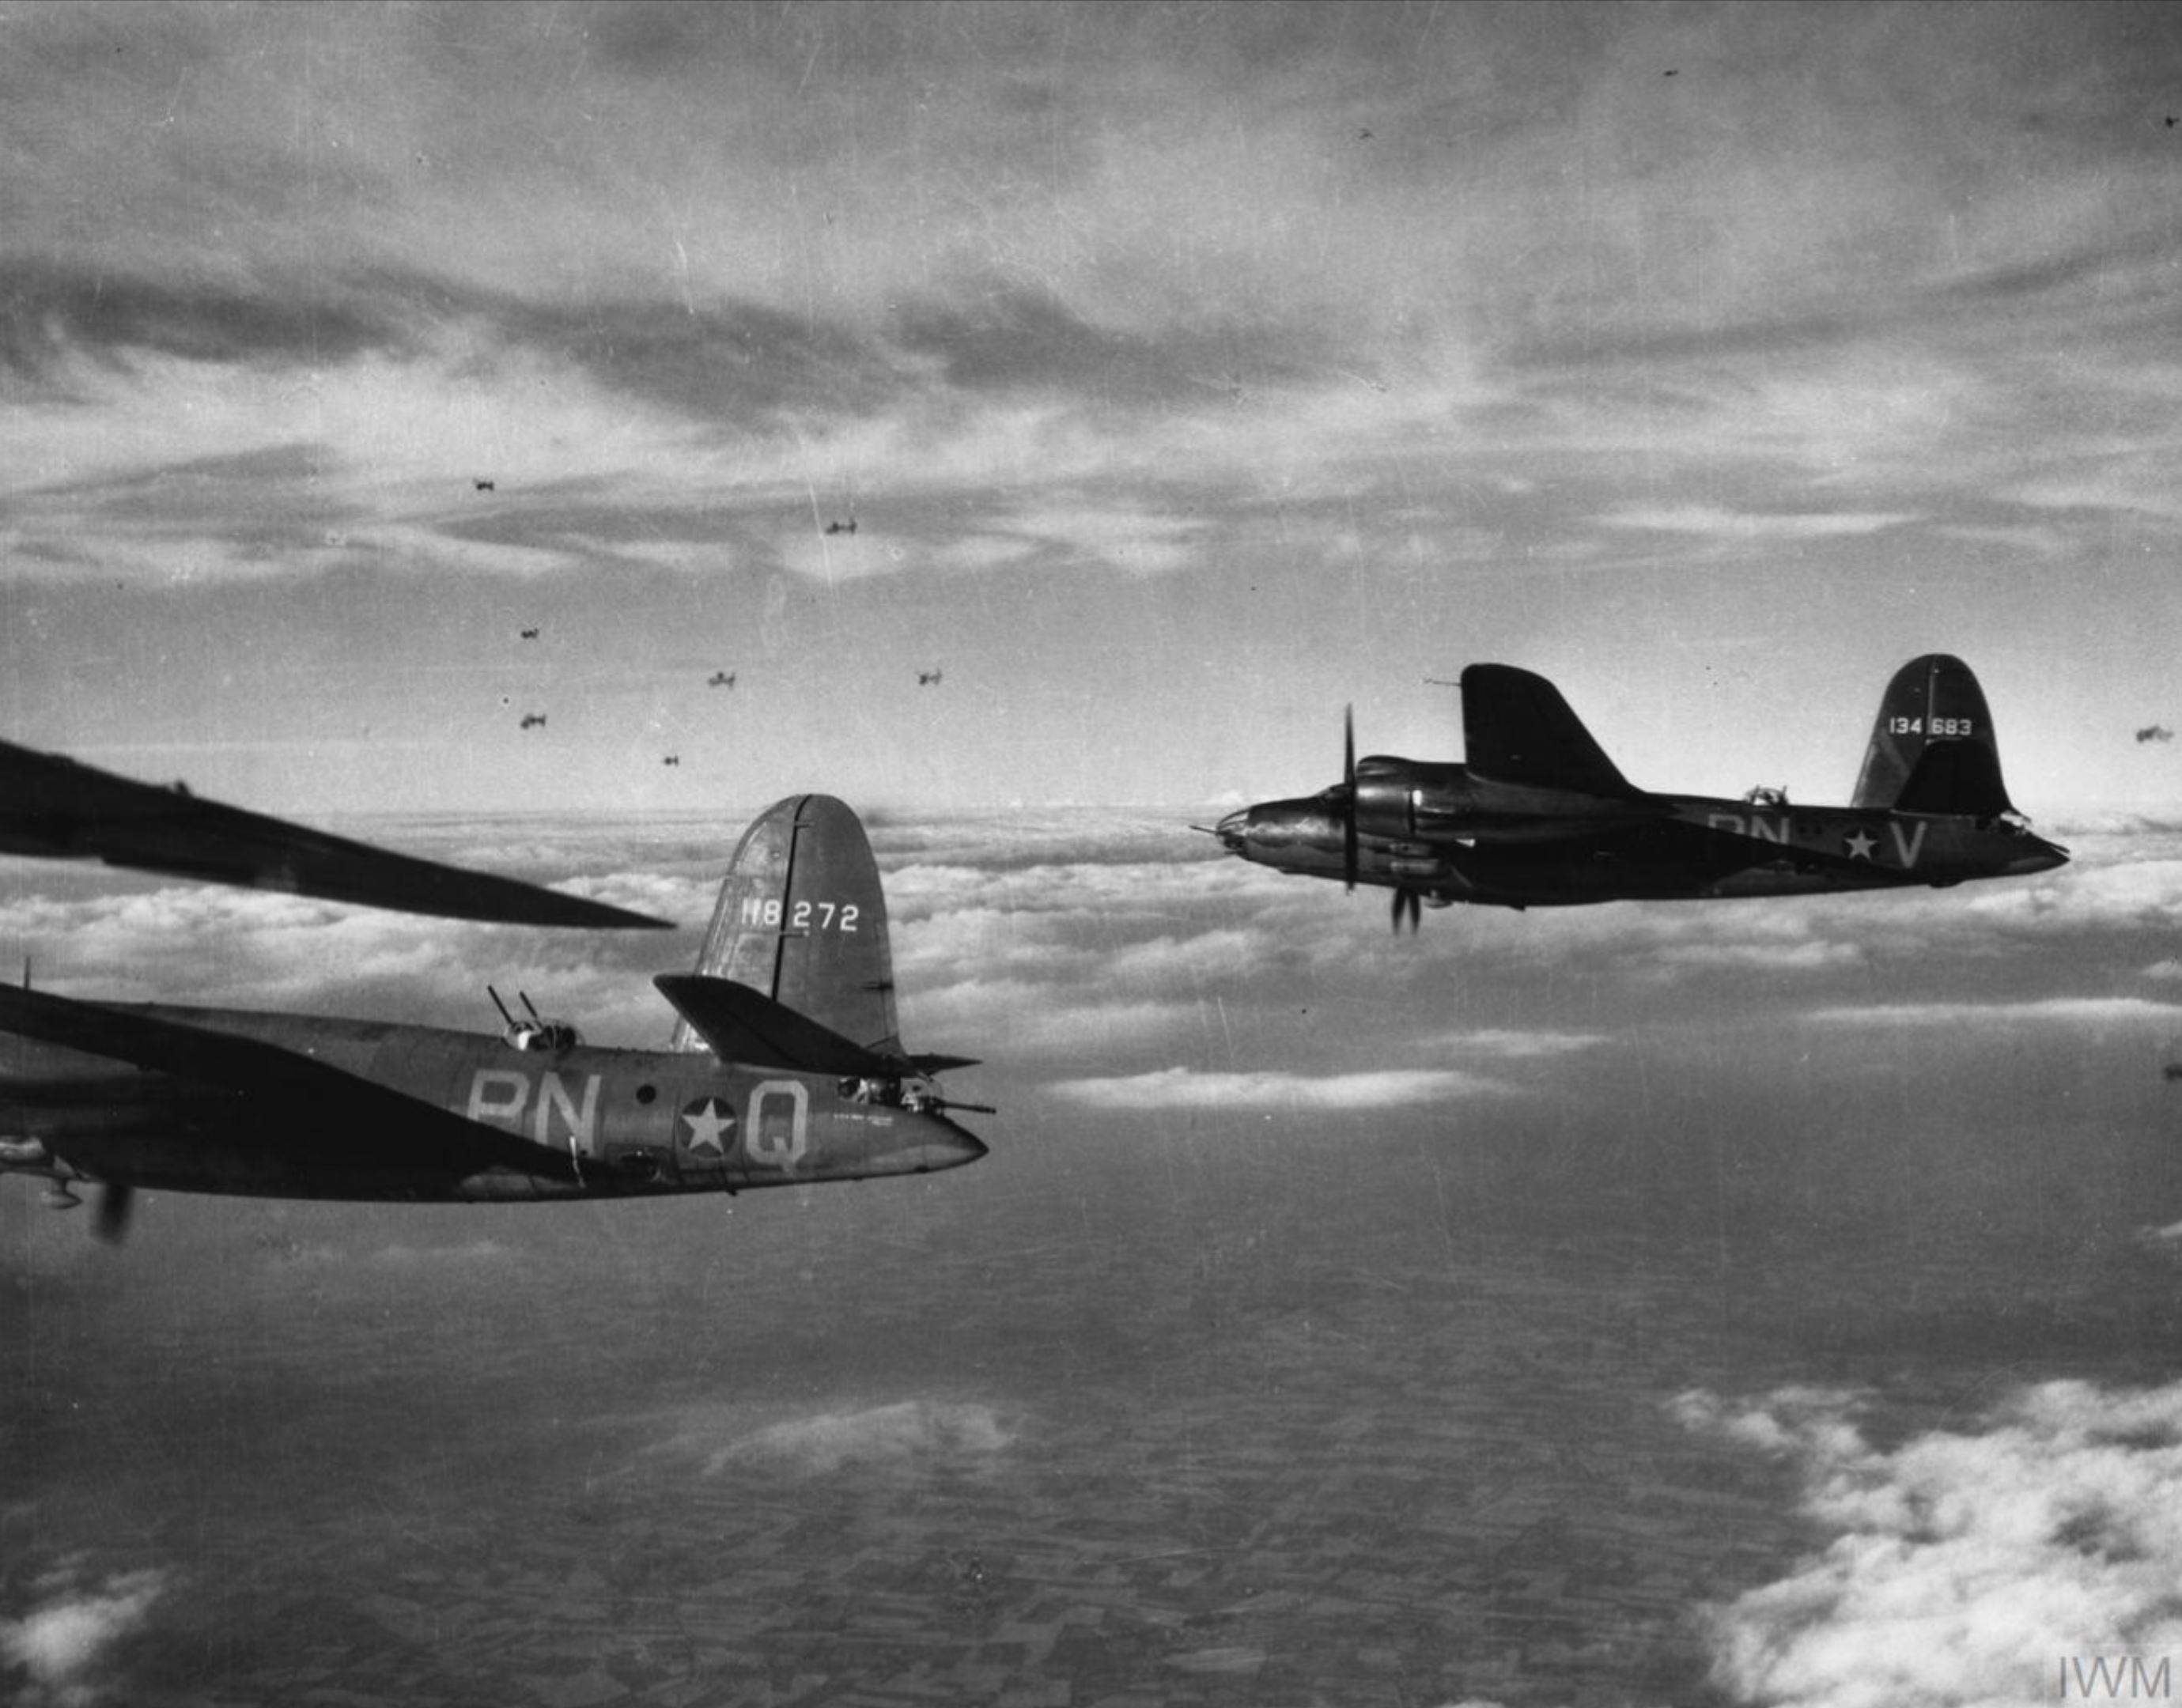 41 34683 B 26C Marauder 9AF 322BG449BS PNV with PNQ enroute to St Omer airfield 9 Aug 1943 FRE4566